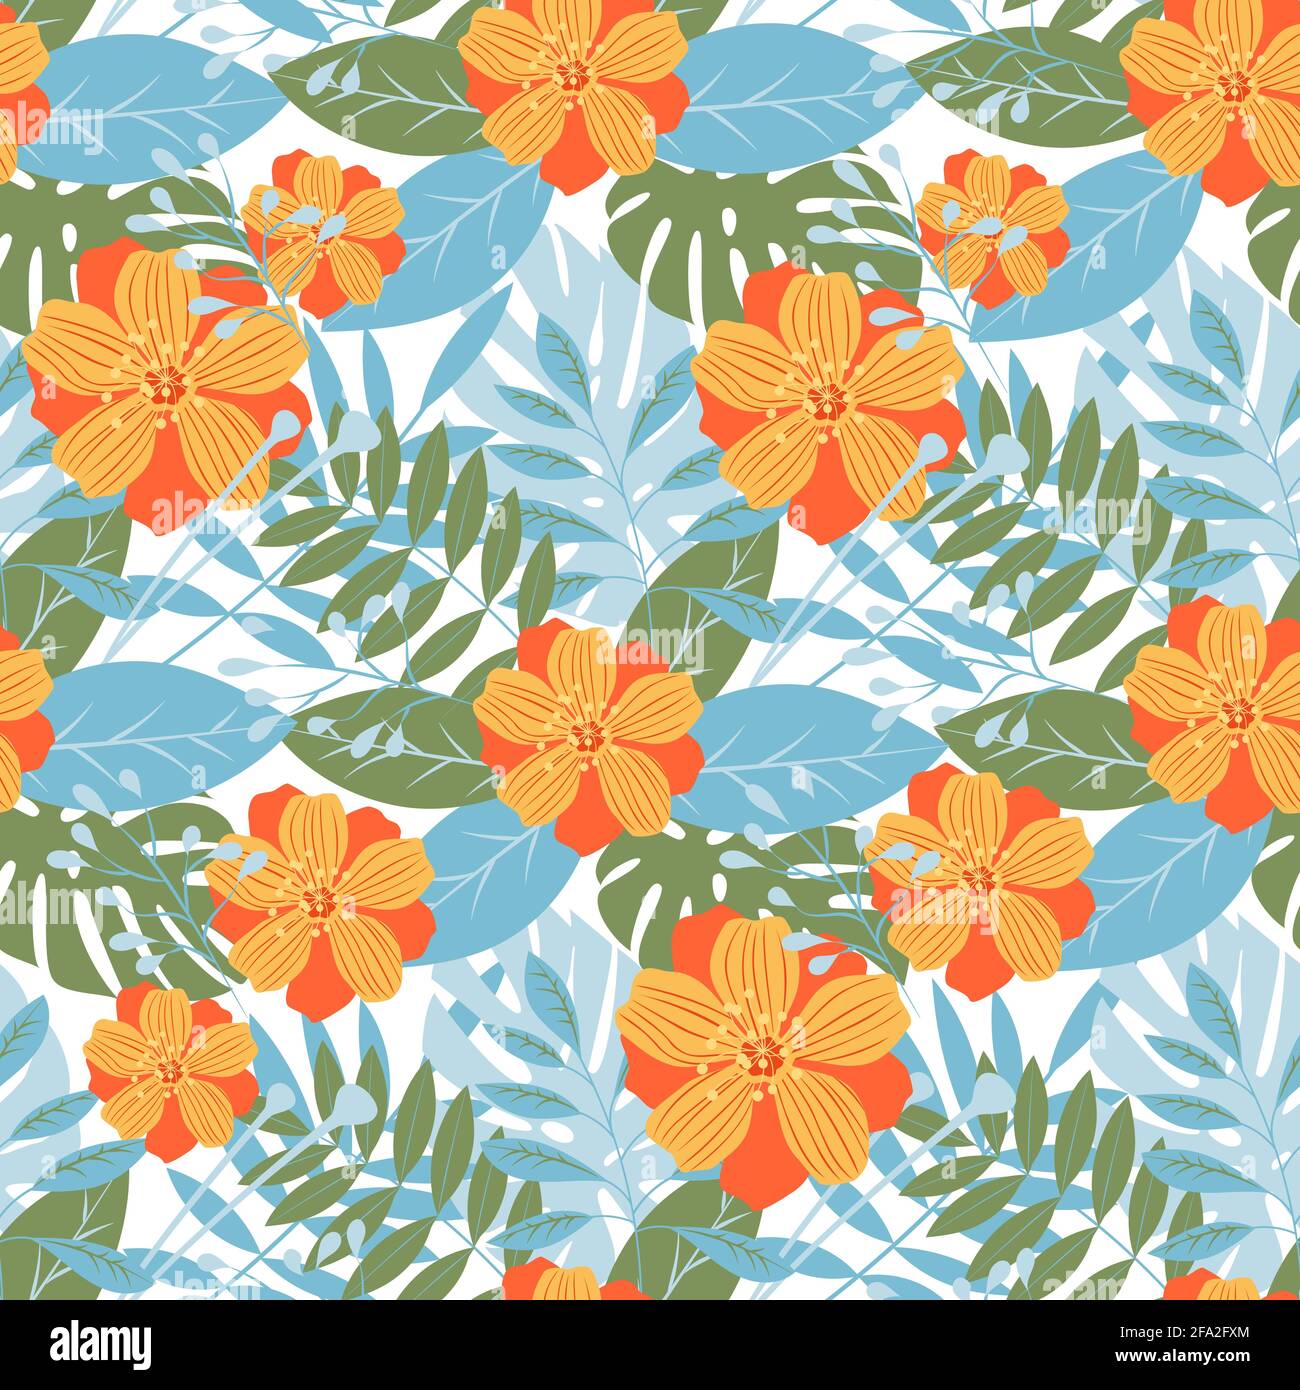 Trendy vector pattern of blue and green tropical leaves and plants with orange flowers. Seamless floral spring and summer design over white background Stock Vector